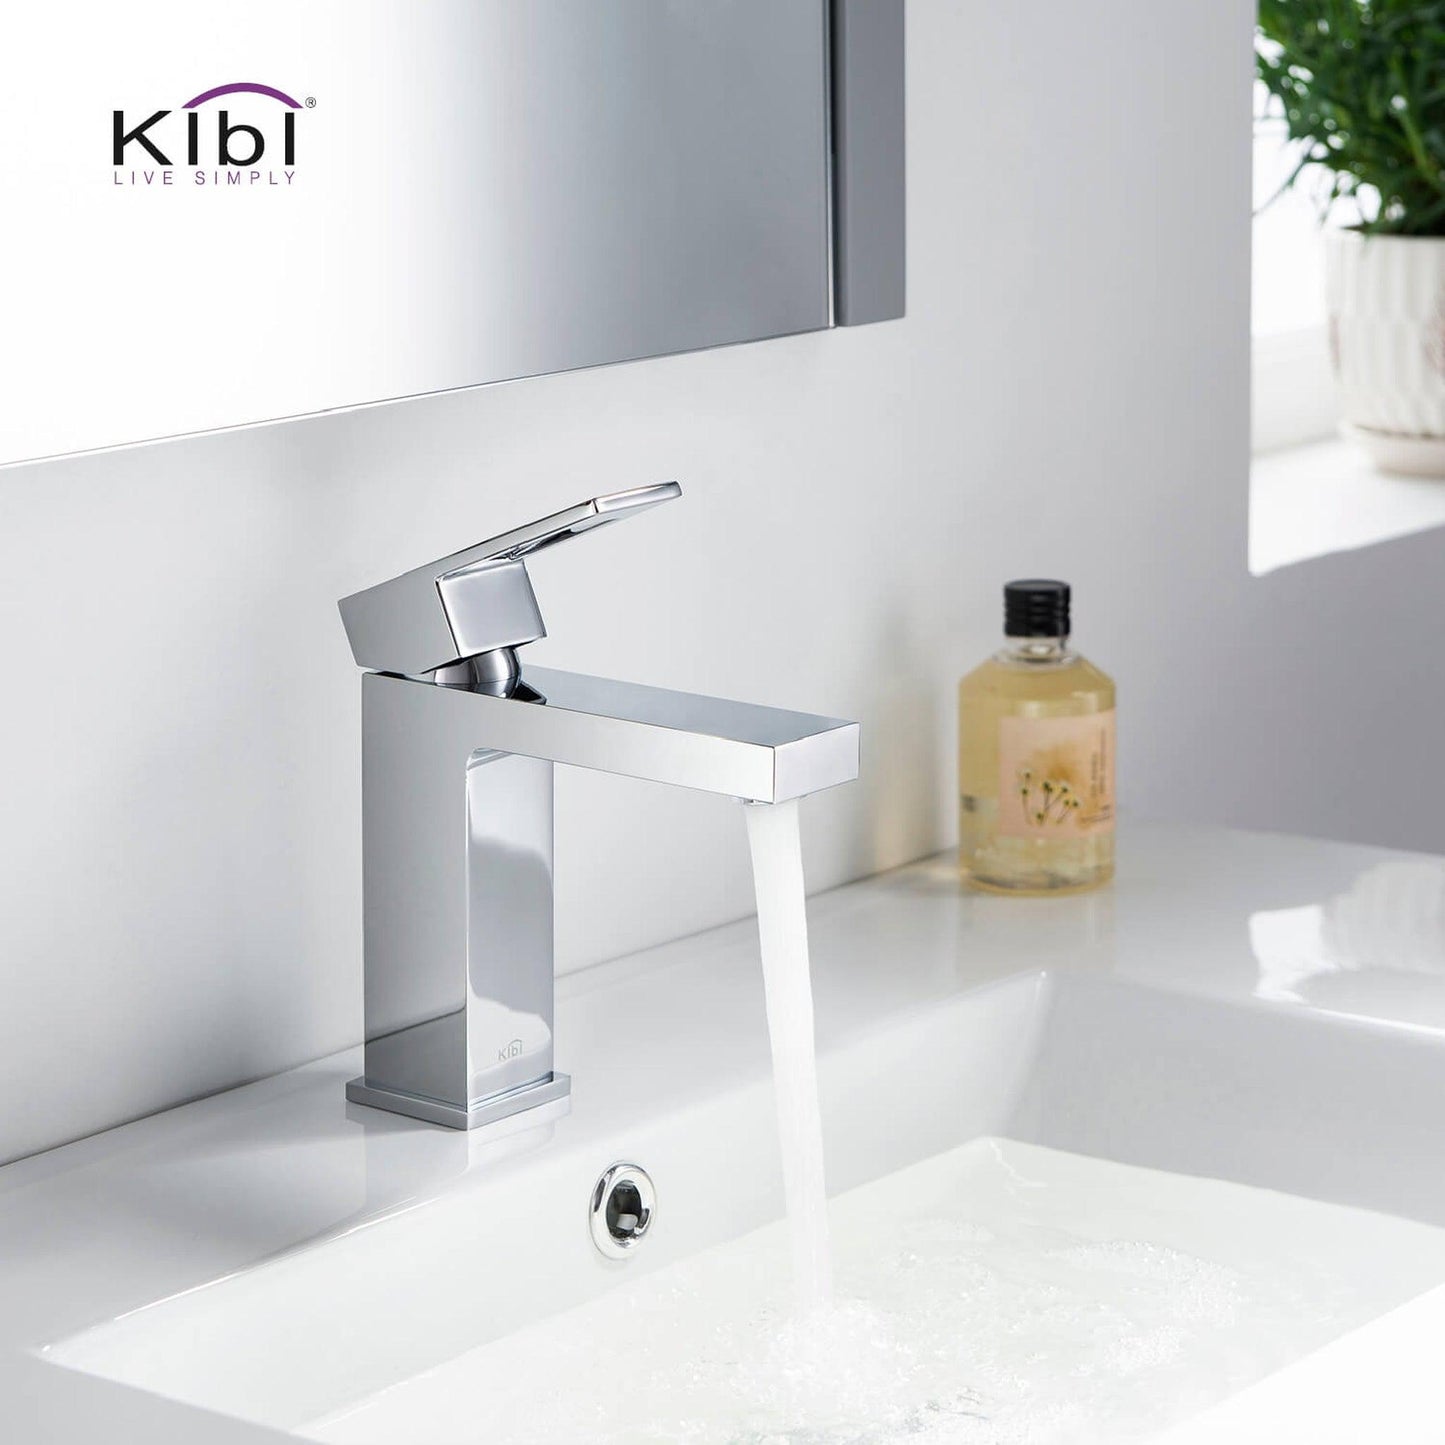 KIBI Cubic Single Handle Chrome Solid Brass Bathroom Vanity Sink Faucet With Pop-Up Drain Stopper Small Cover With Overflow